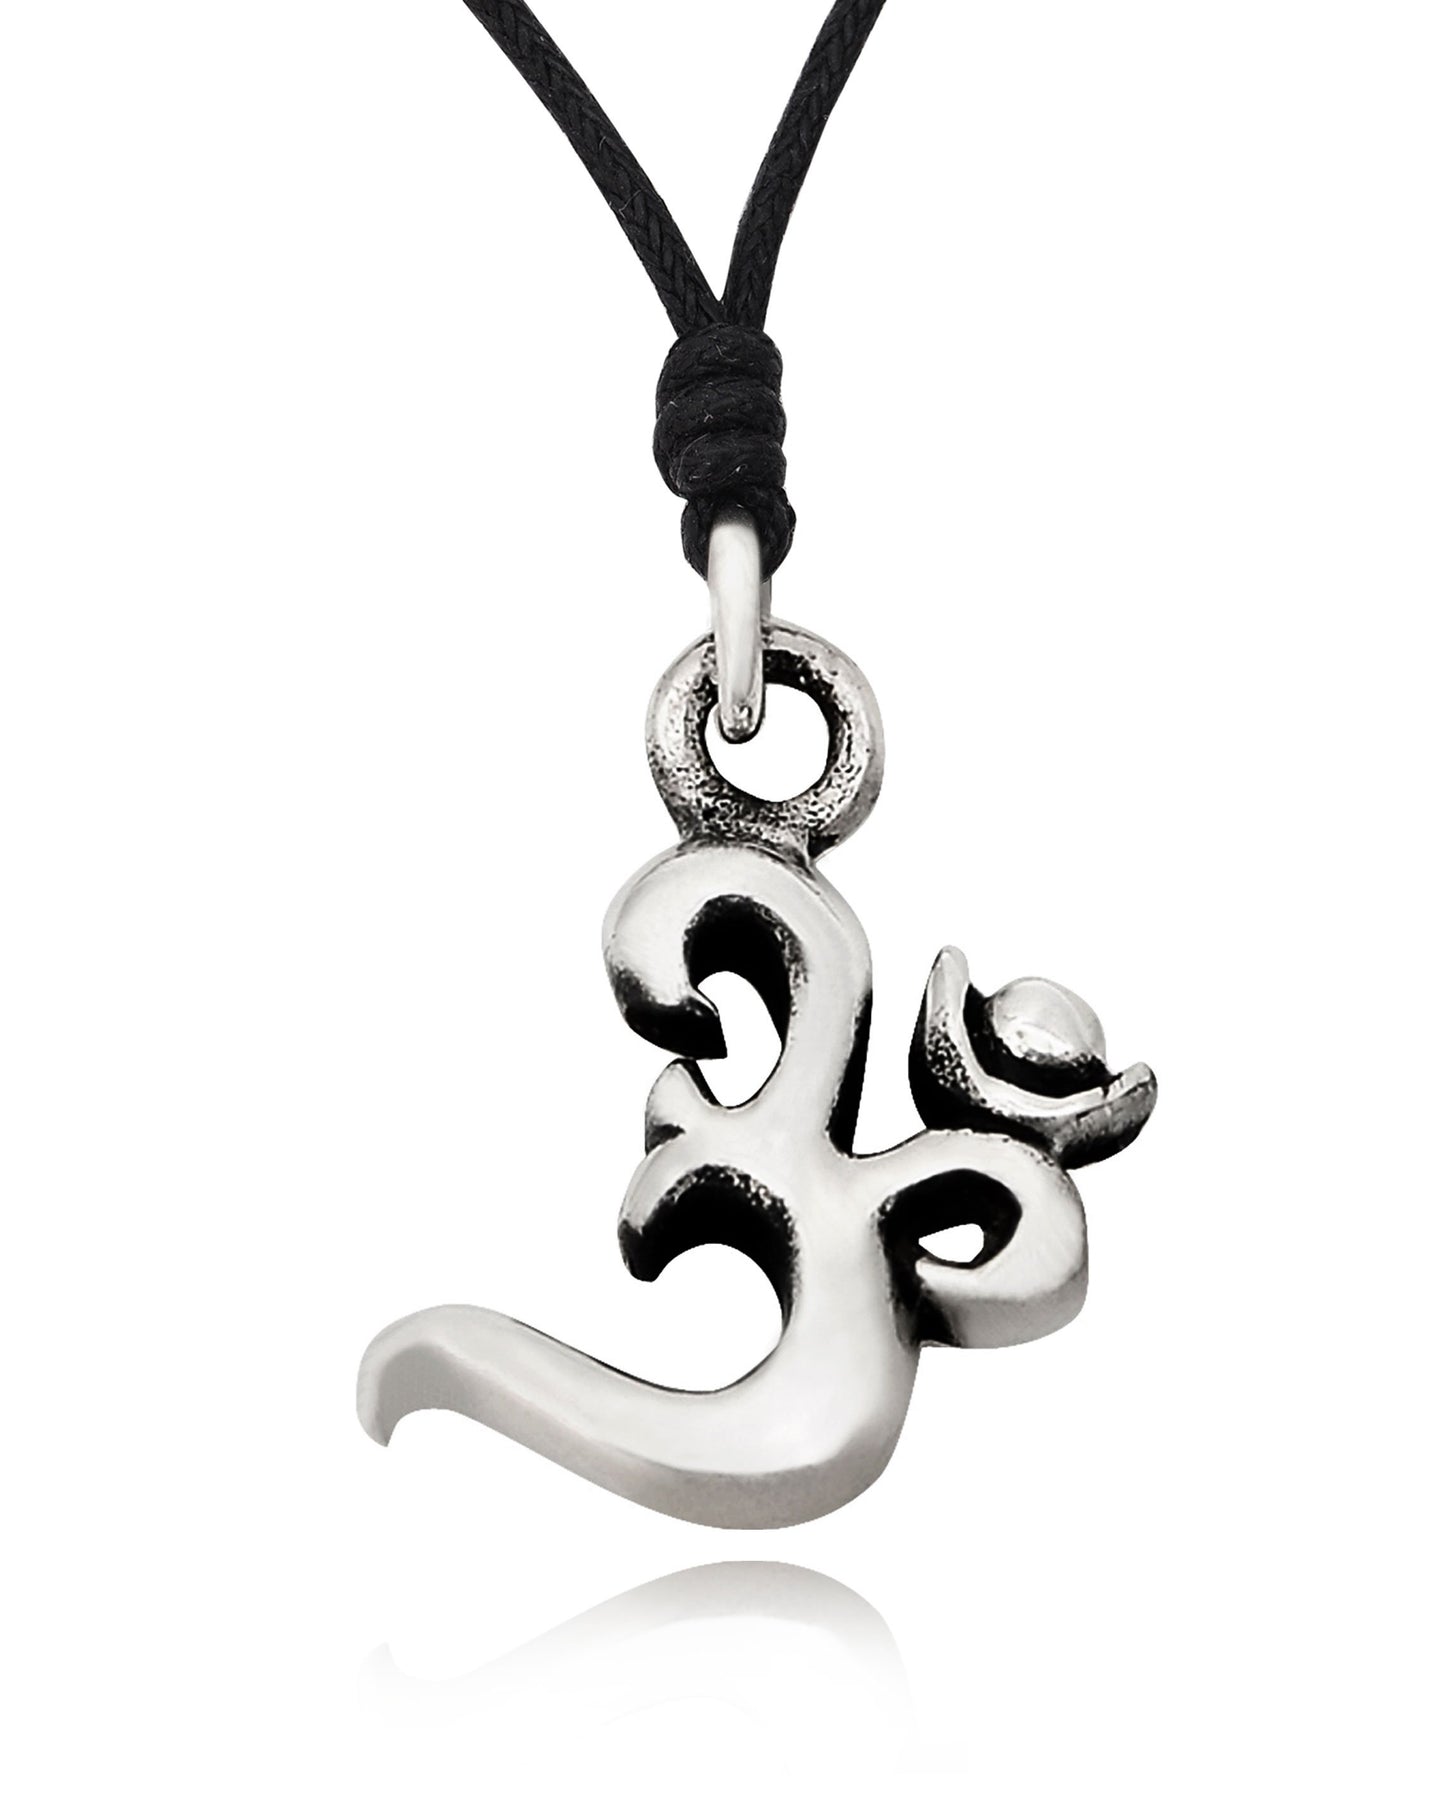 Handmade Om Ohm 92.5 Sterling Silver Pewter Brass Charm Necklace Pendant Jewelry